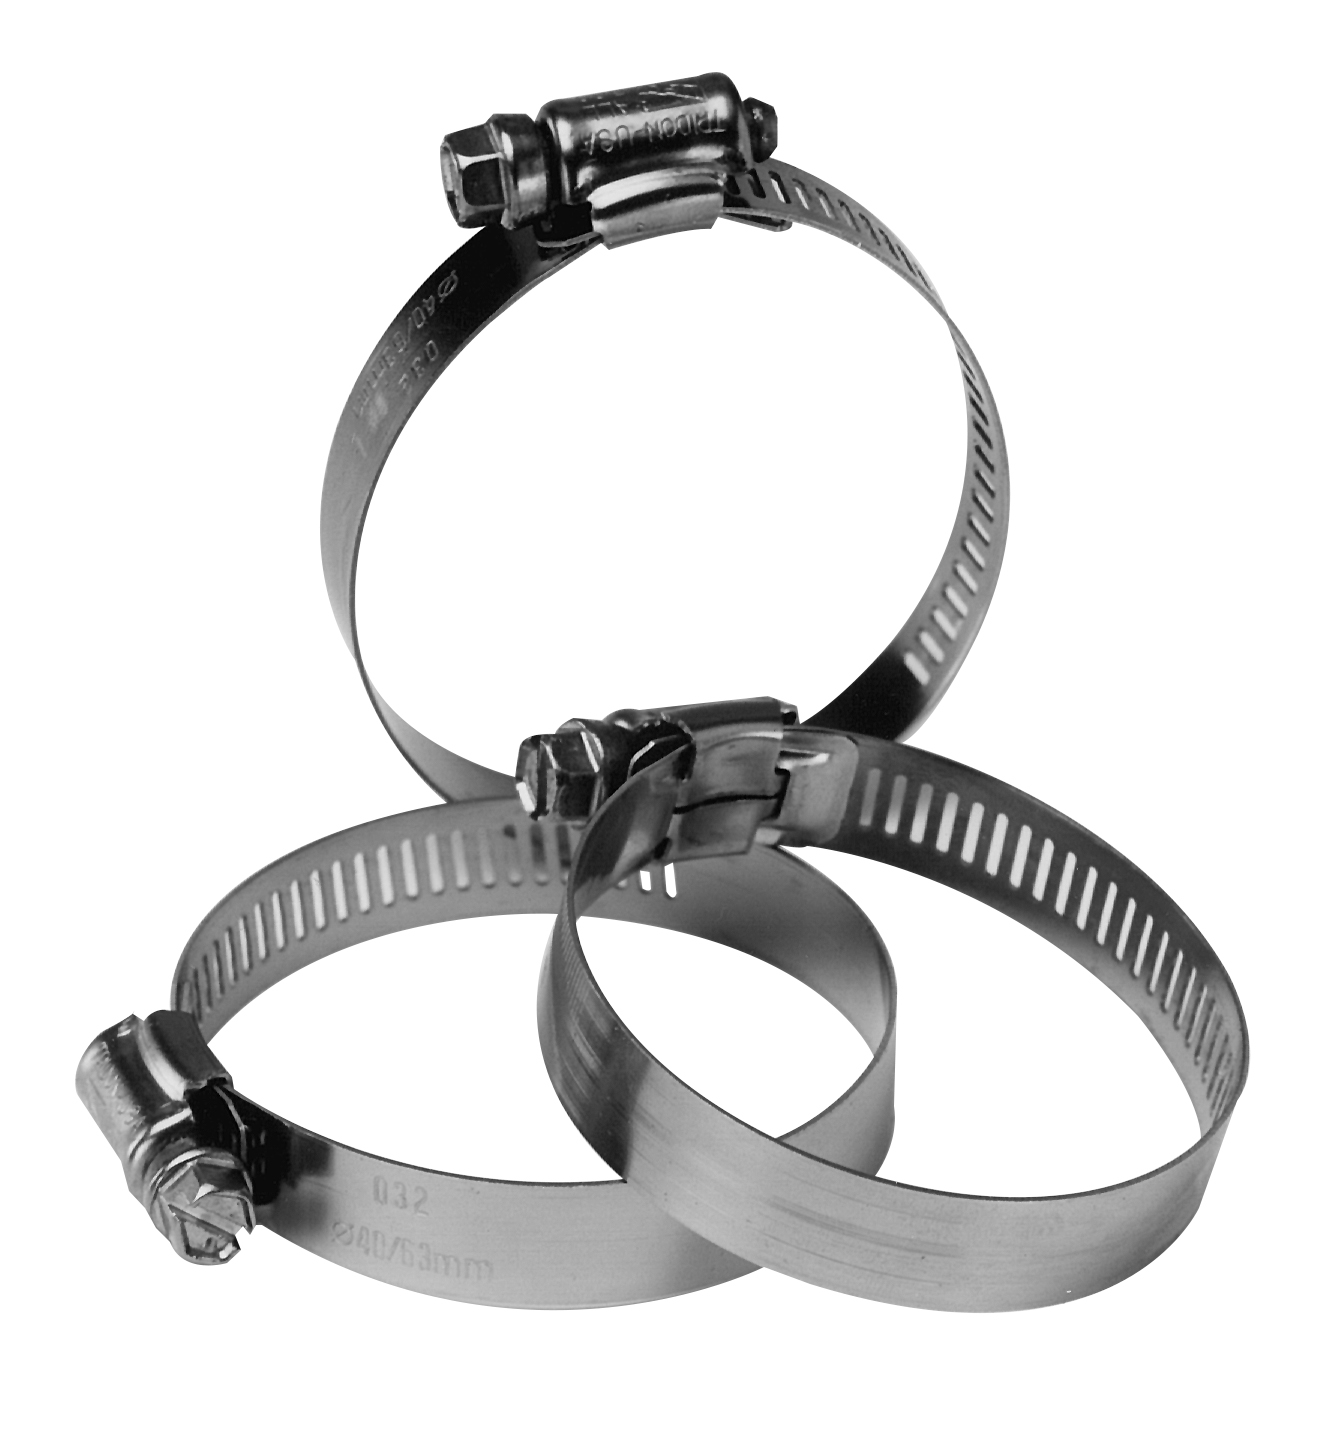 79312 1/2-1 1/8 SIZE 10 HOSE CLAMP (10) - Clamps and Hangers